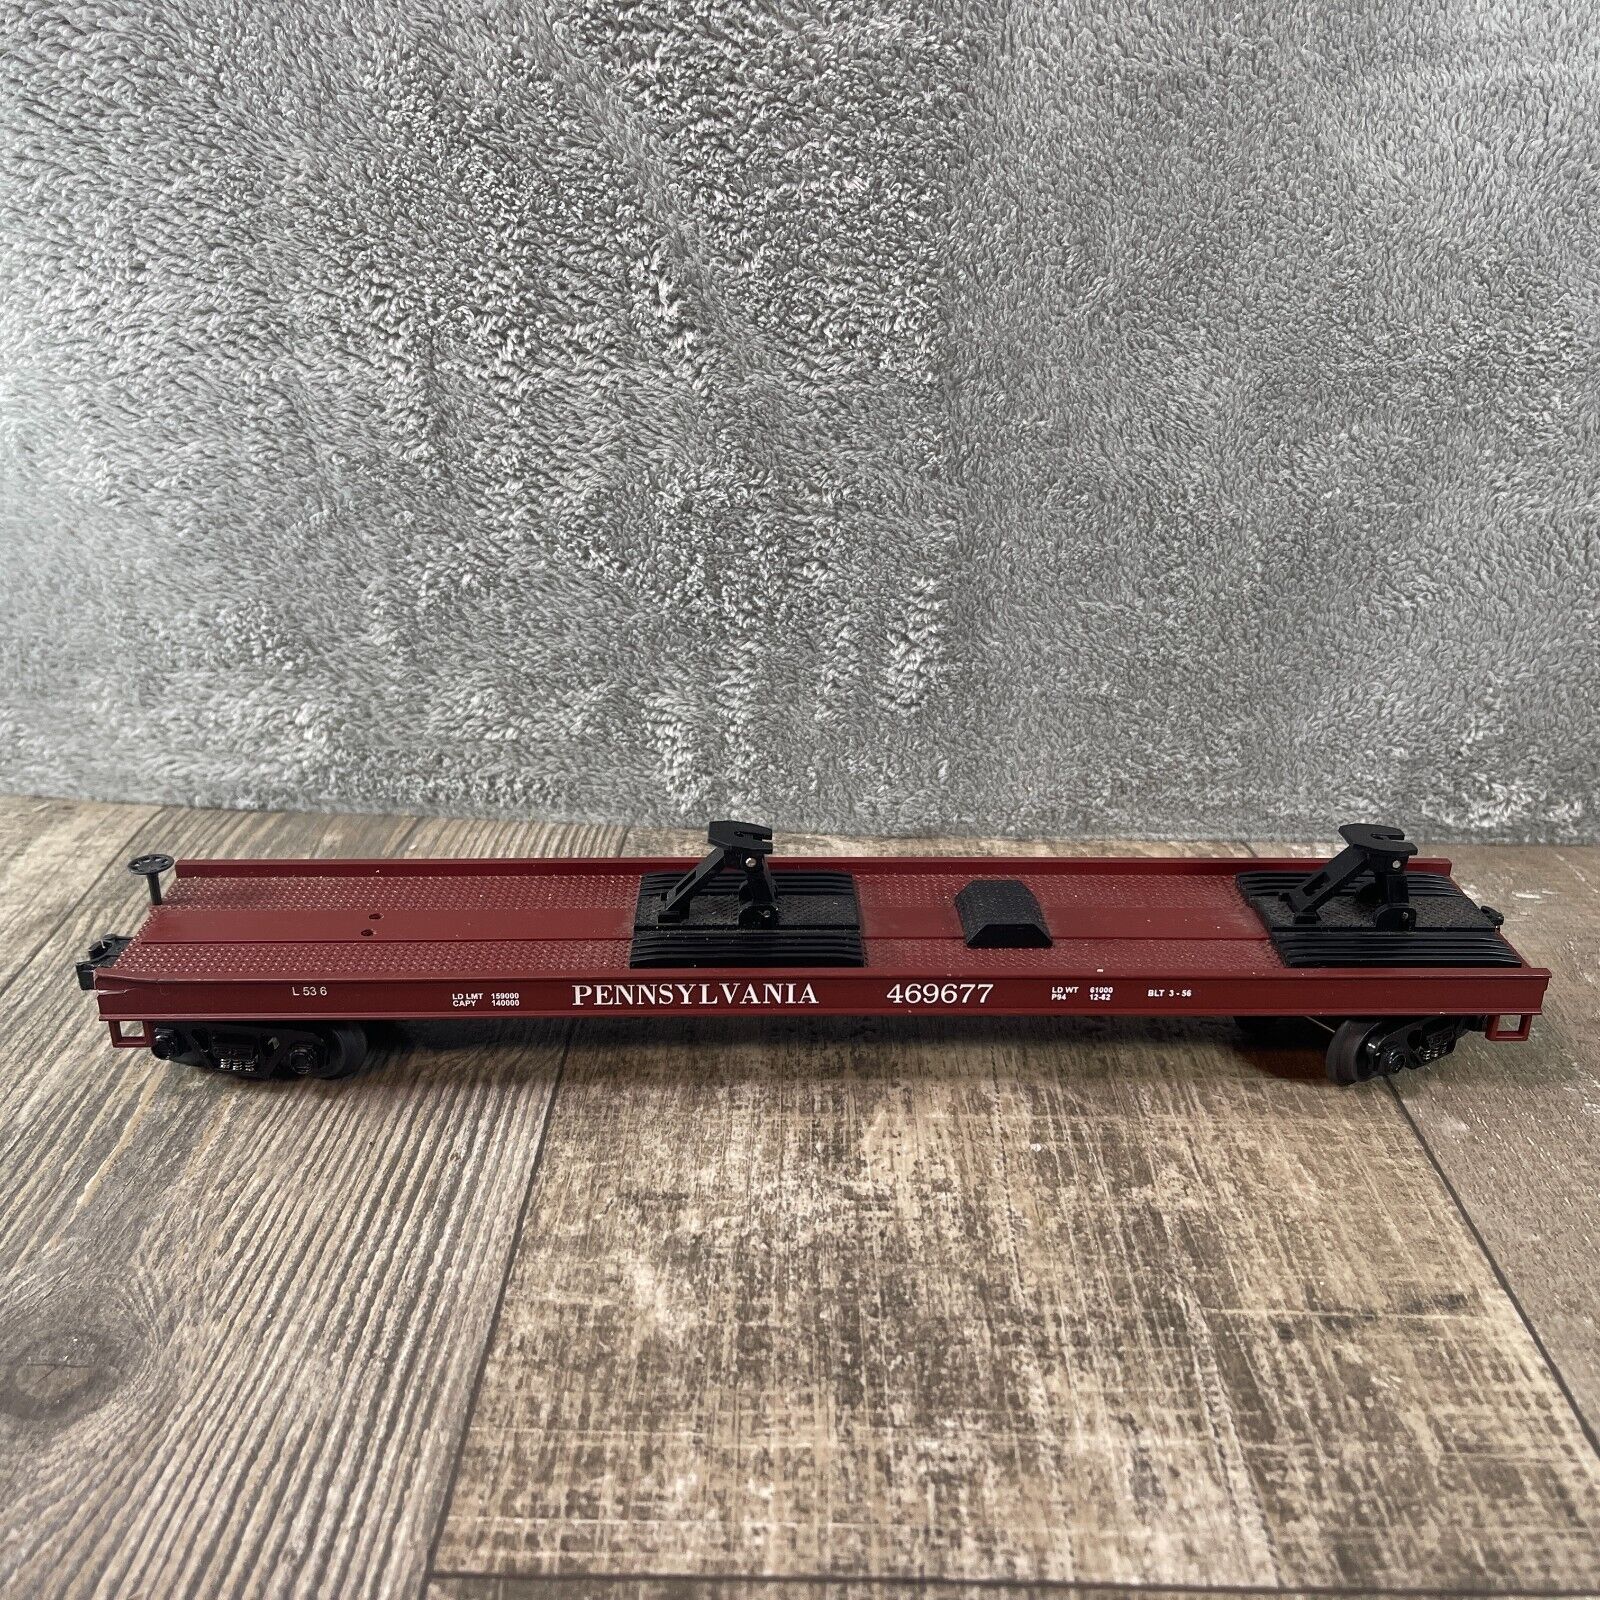 Primary image for MTH Pennsyylvania 469677 Flat car Only  O scale